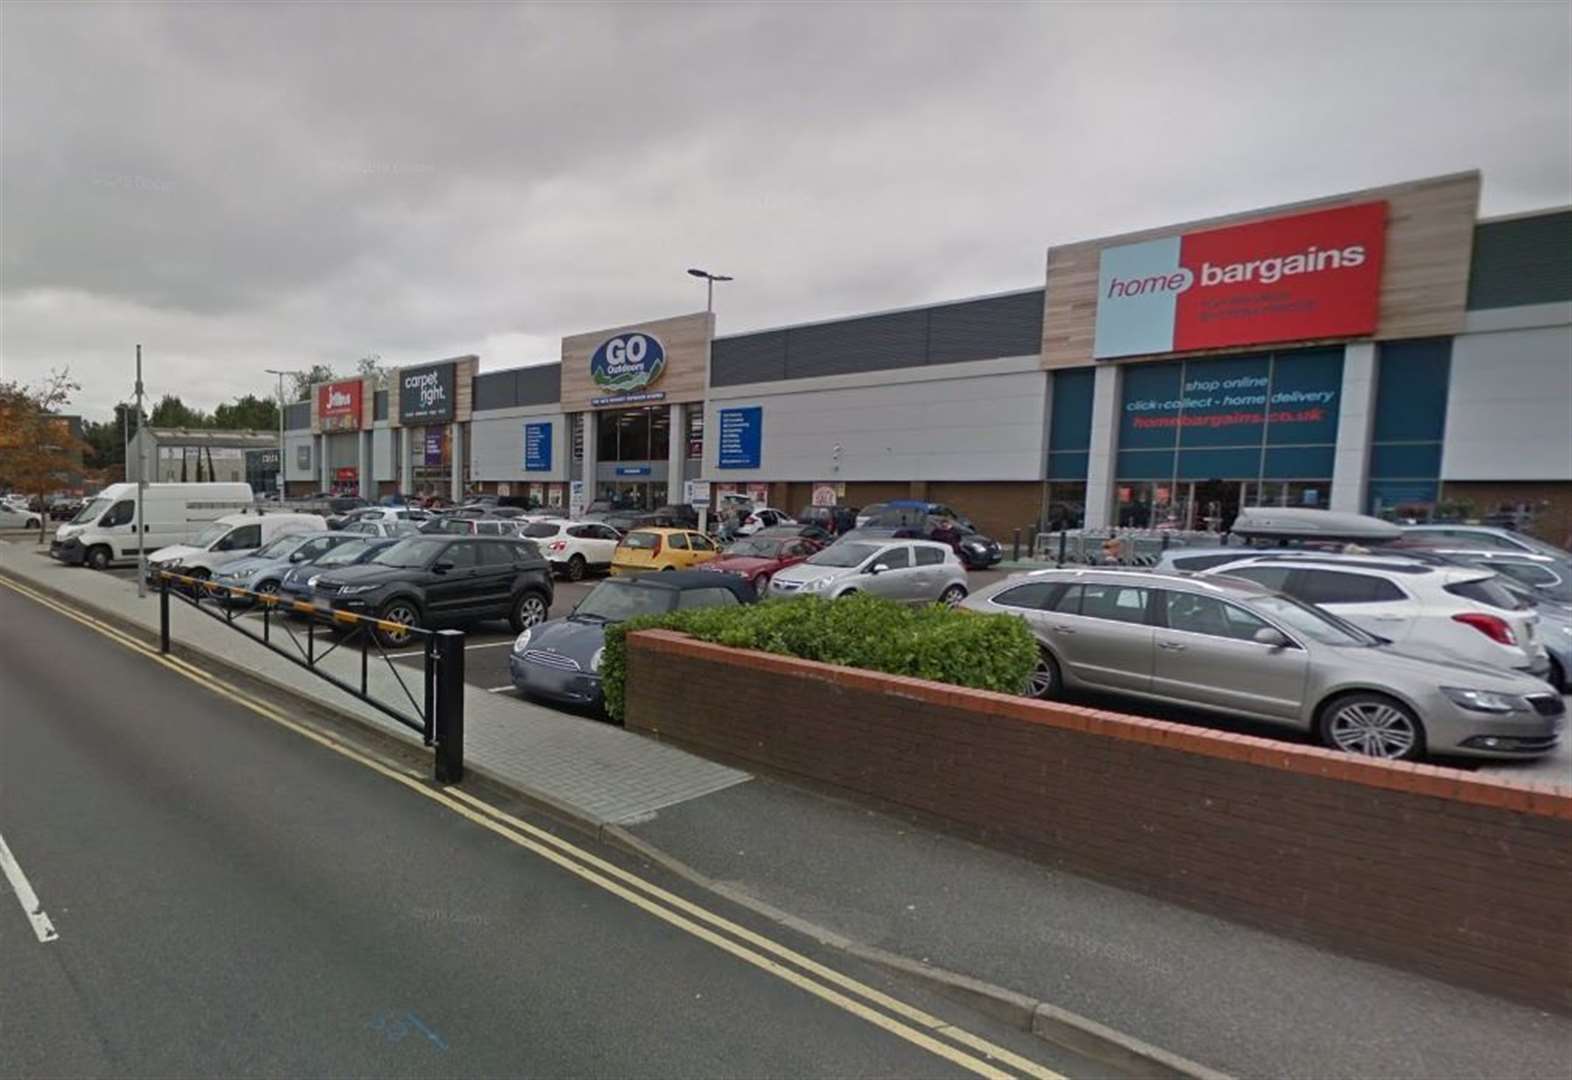 Scores of shoppers refunded in retail park ticket fiasco